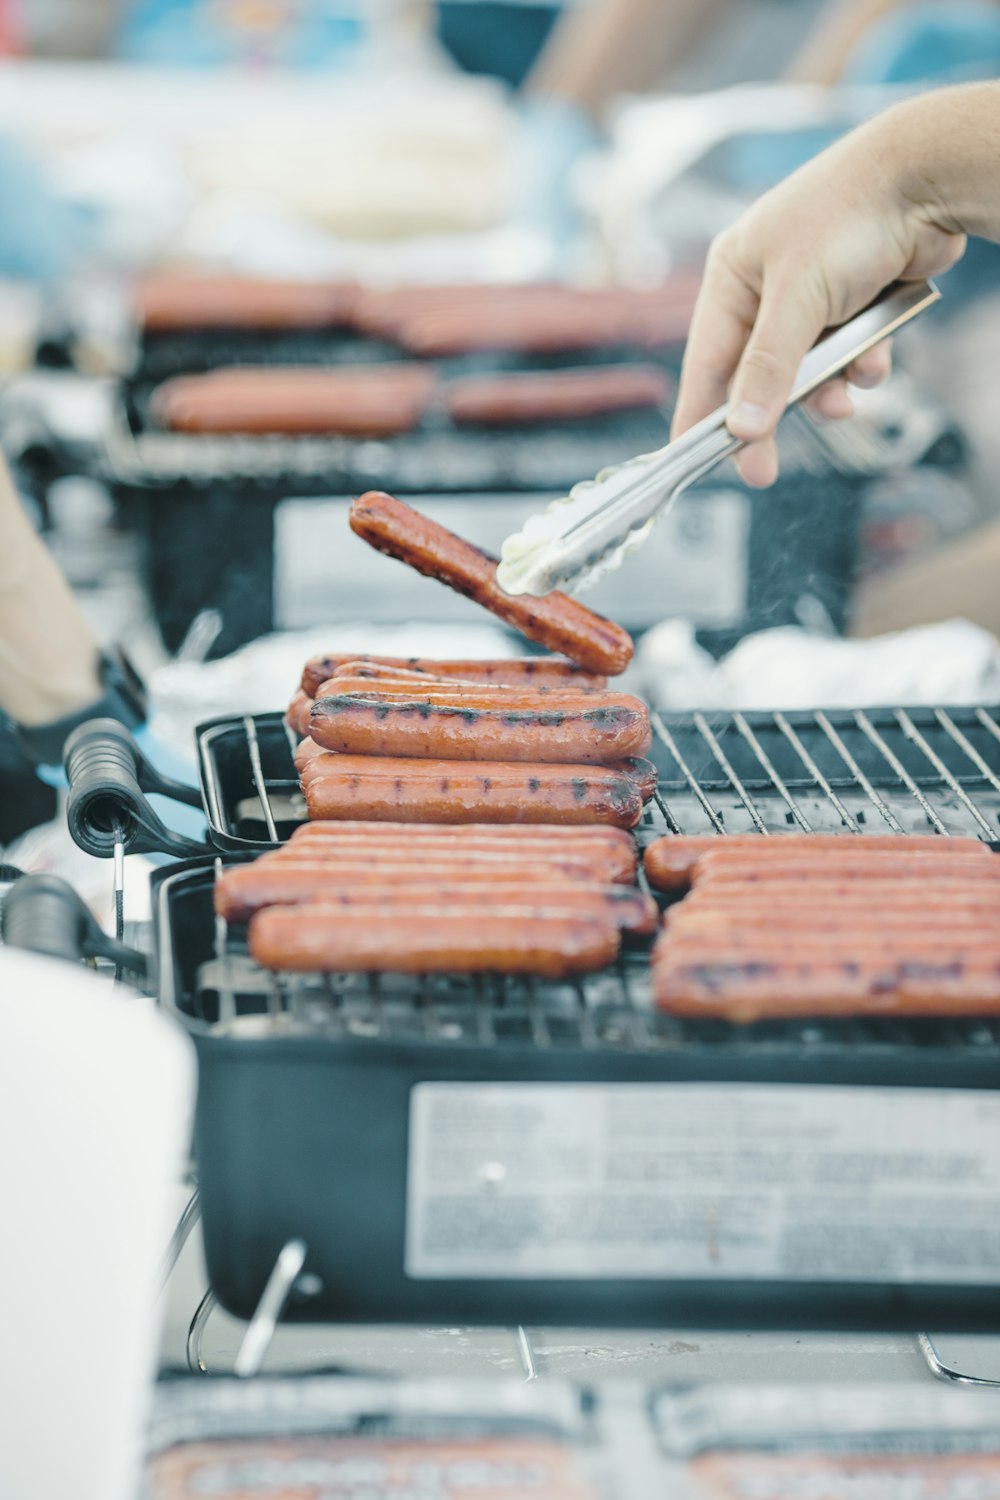 a person cooking hot dogs on a grill